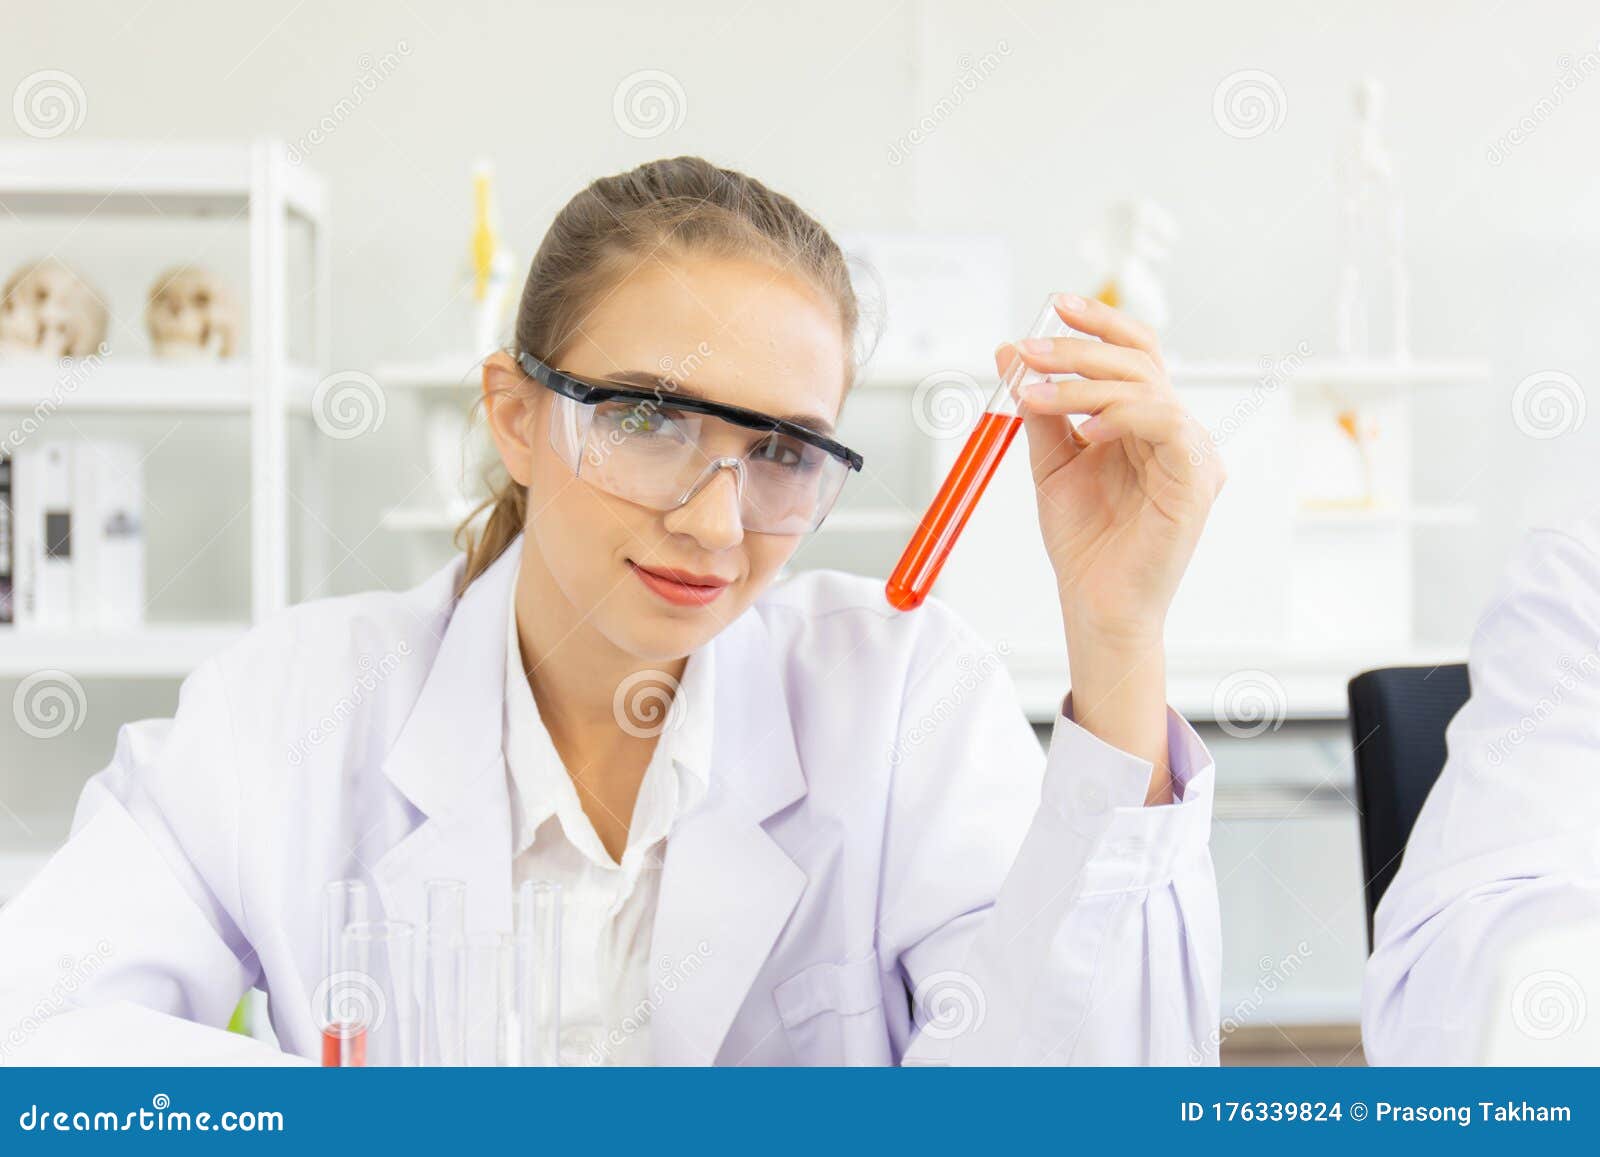 A Beautiful Female Scientist is Operating in a Science Lab with Various ...